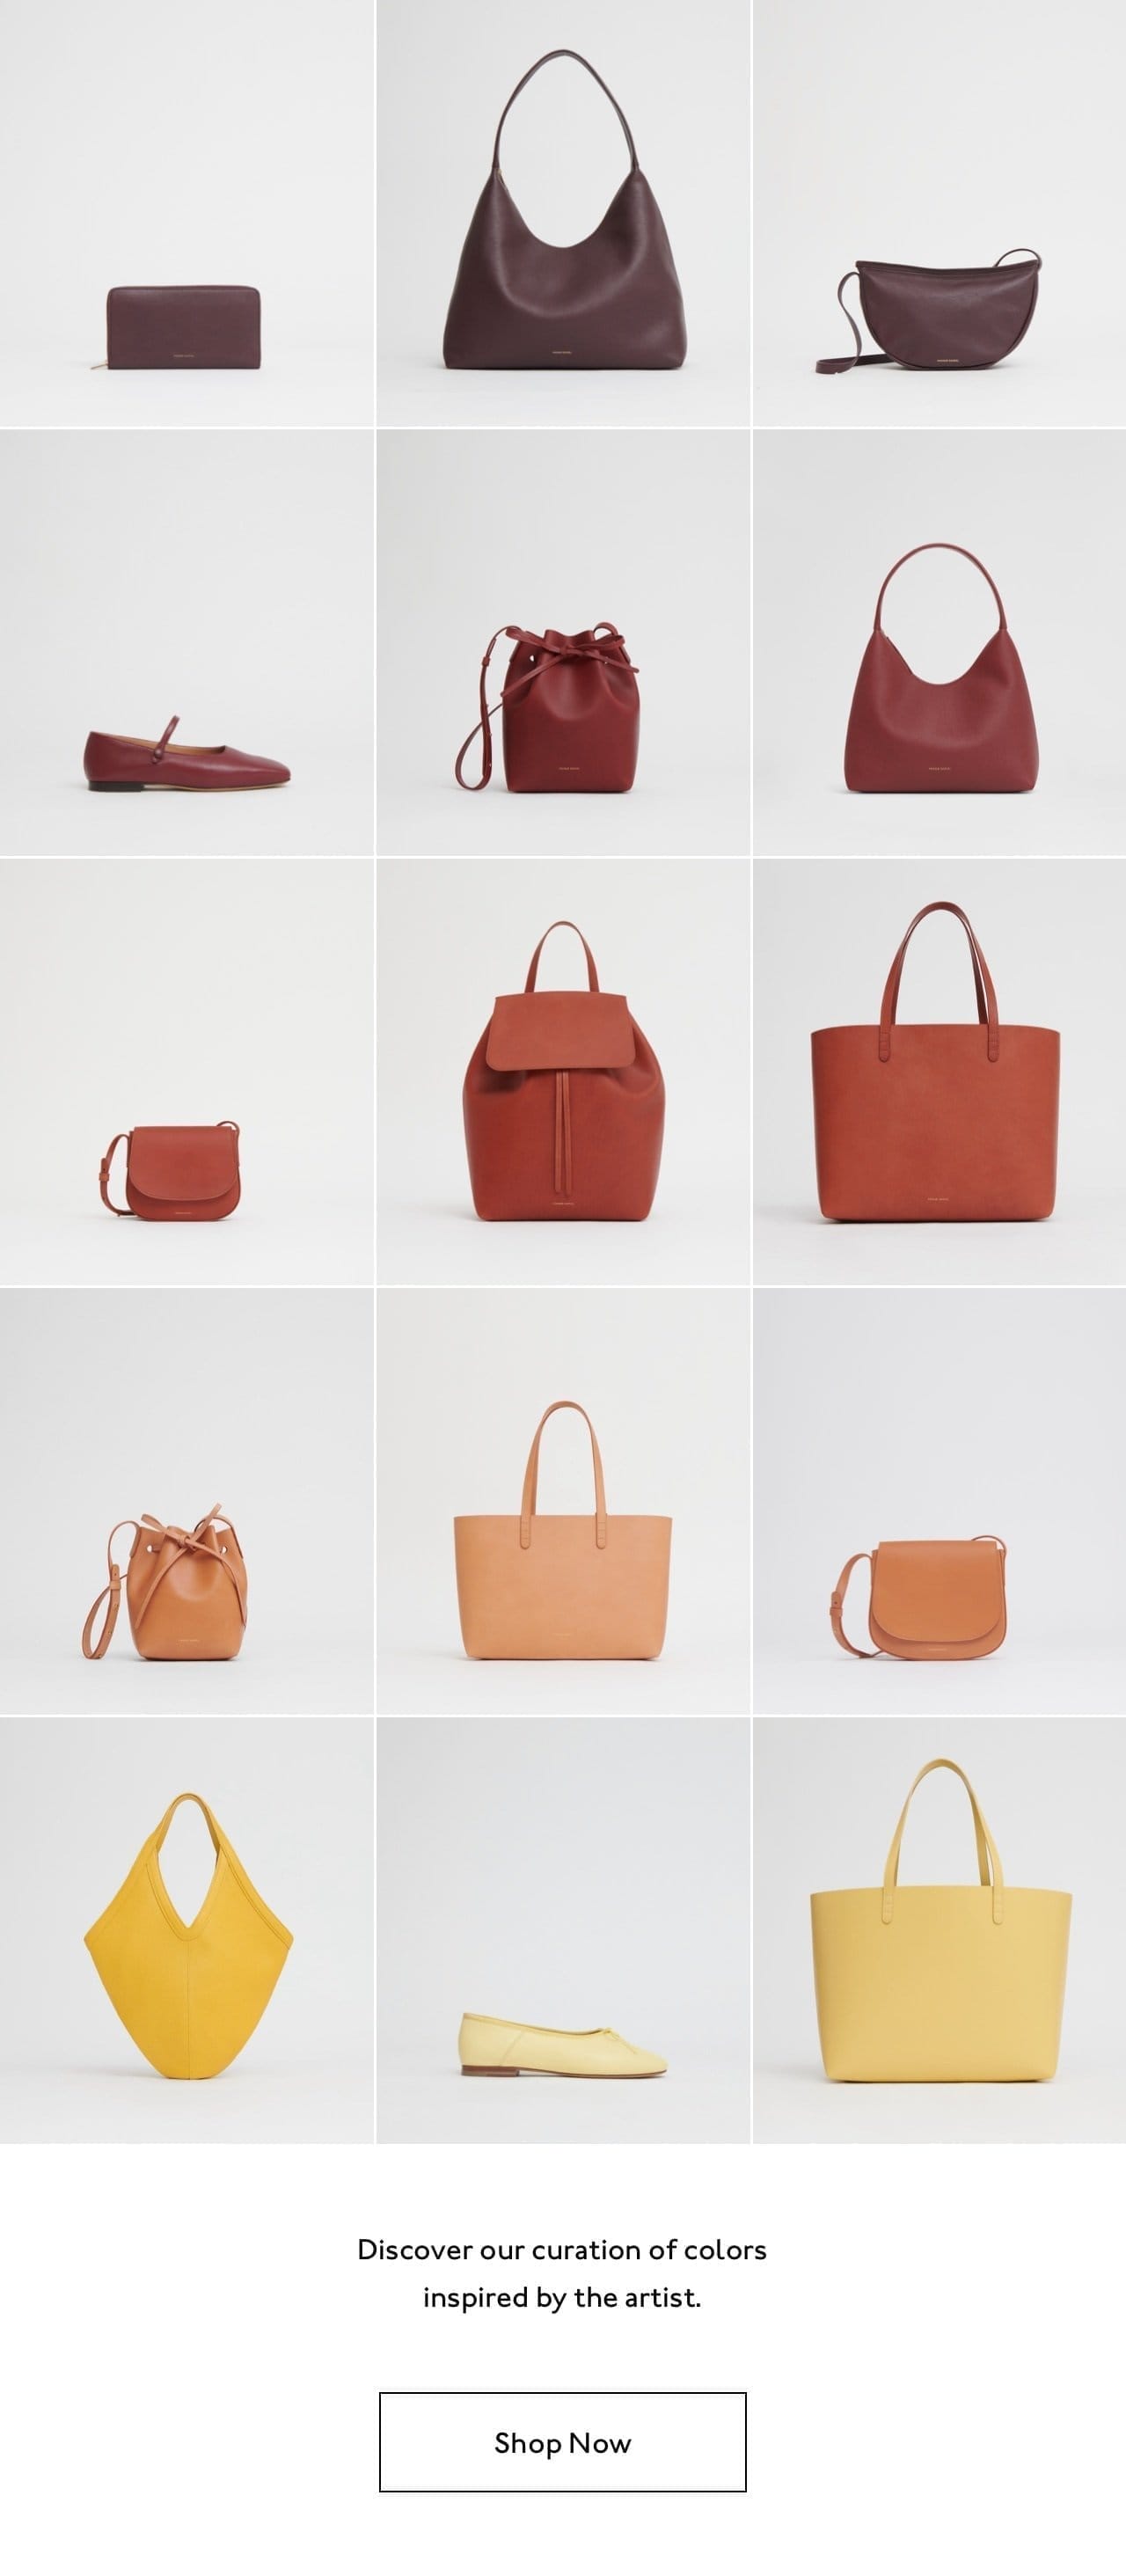 Discover our curation of colors inspired by the artist now: totes, crossbody bags, top handle bags and more.